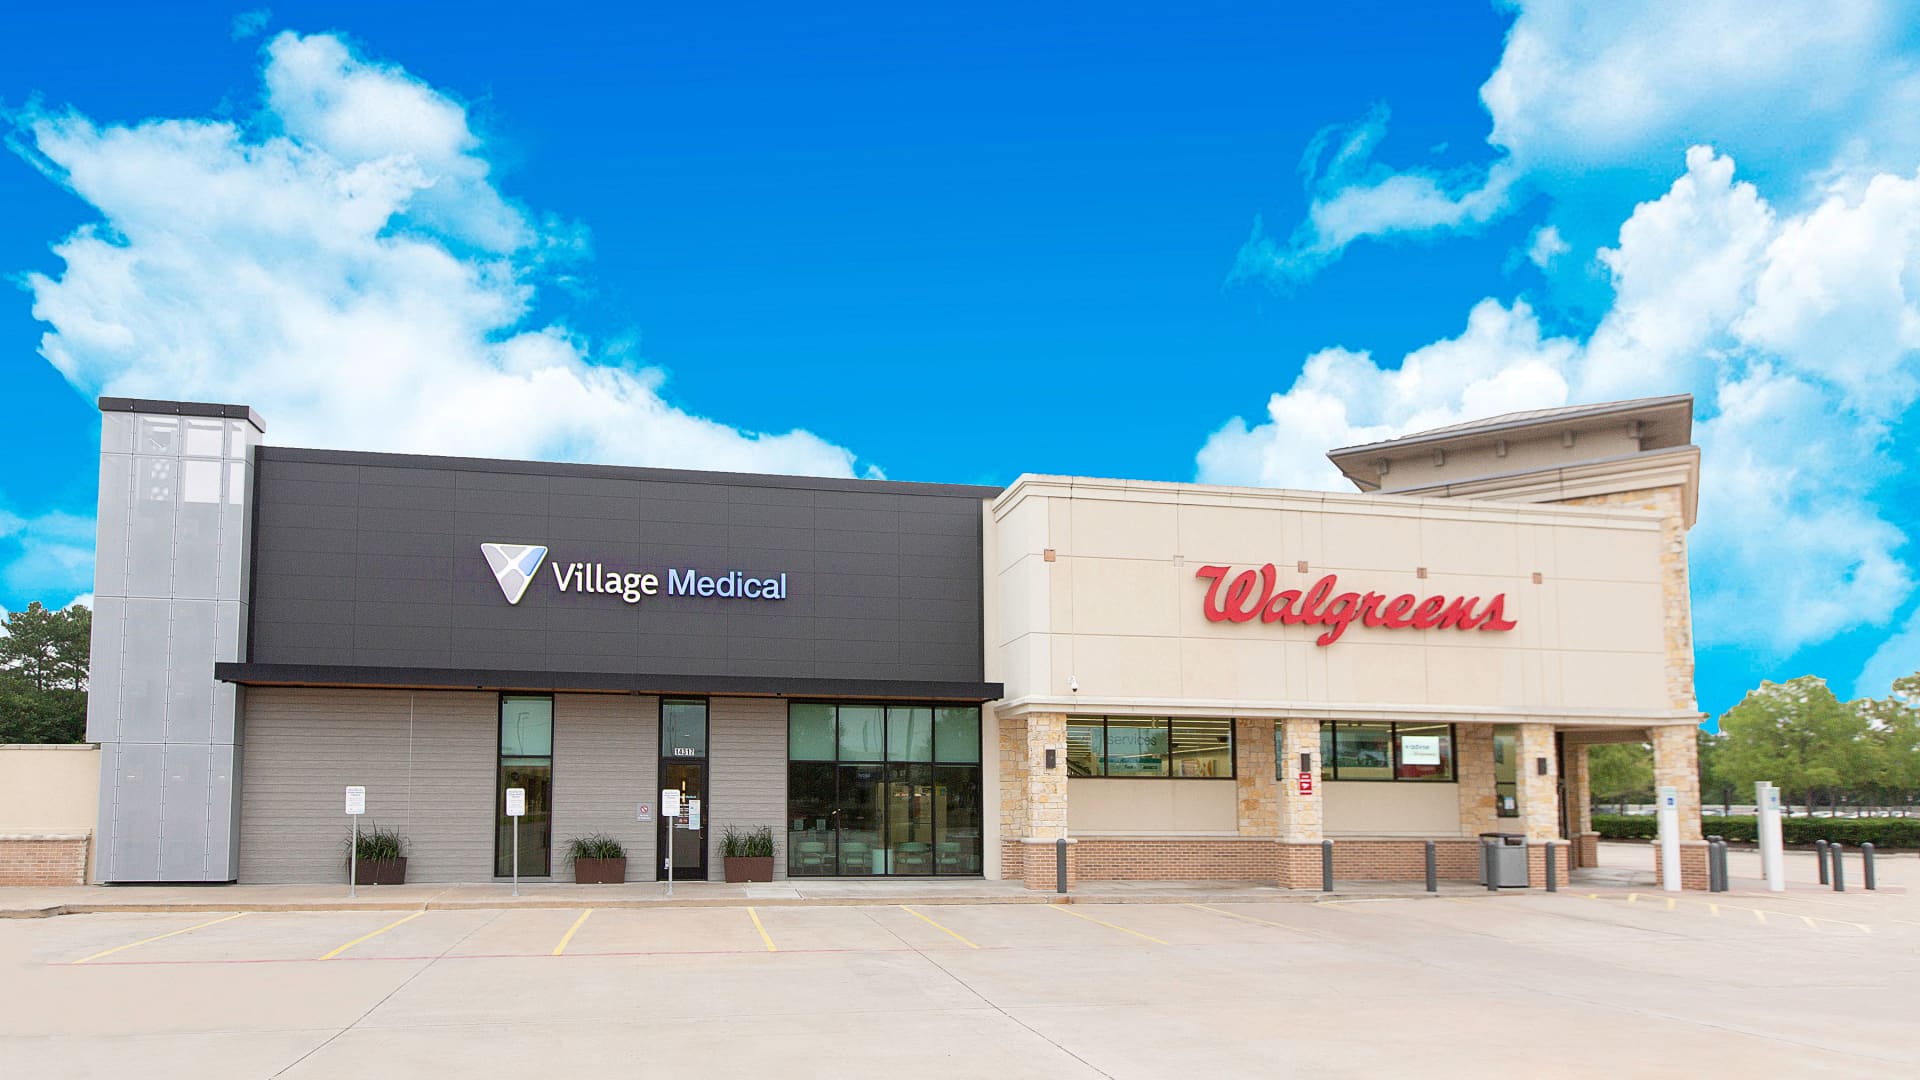 Walgreens slashes profit guidance, citing ‘challenging’ environment for consumers and pharmacies